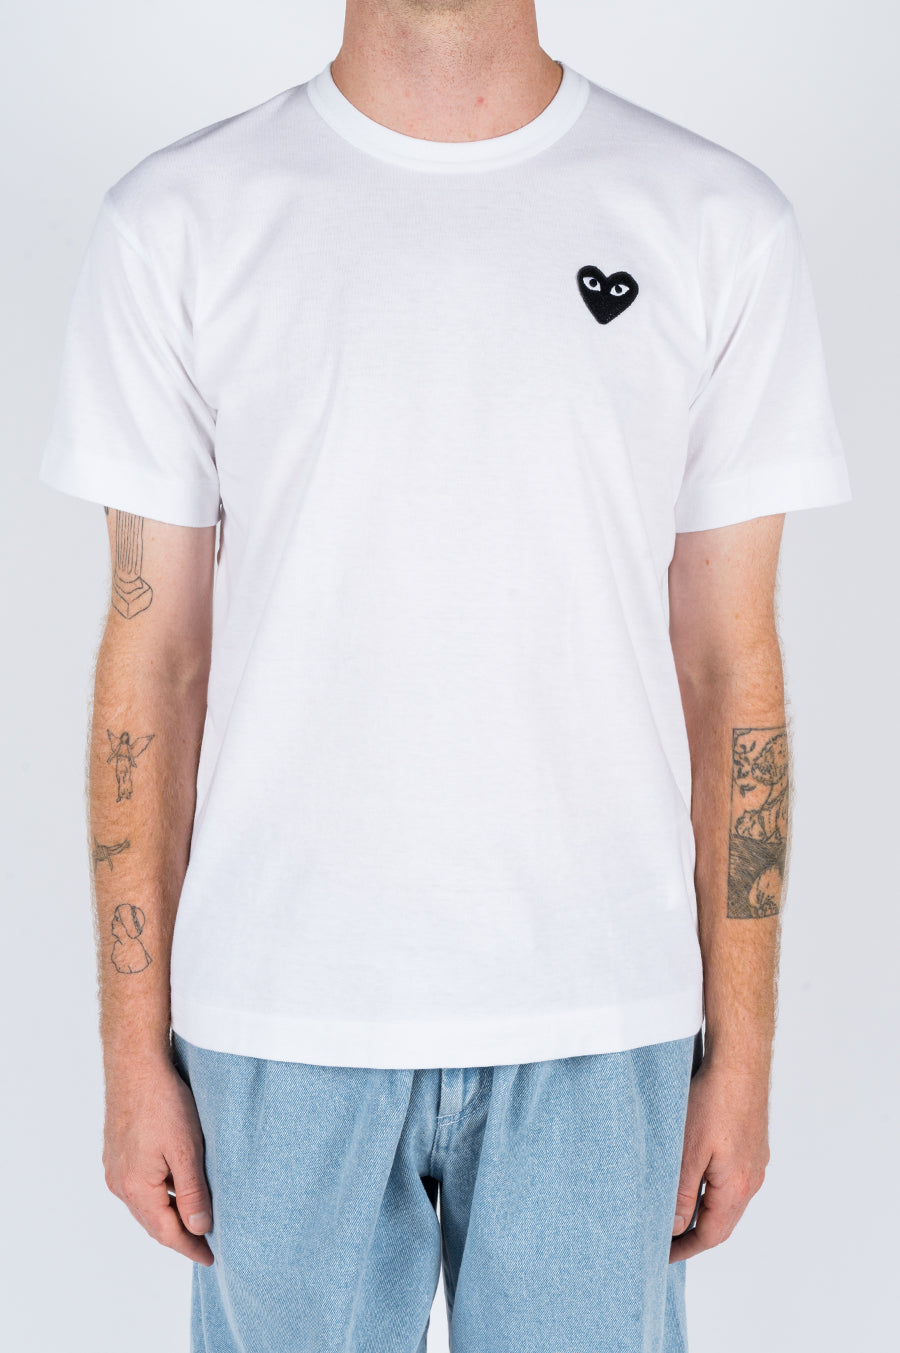 COMME DES GARCONS PLAY SS TSHIRT WHITE BLACK HEART - BLENDS